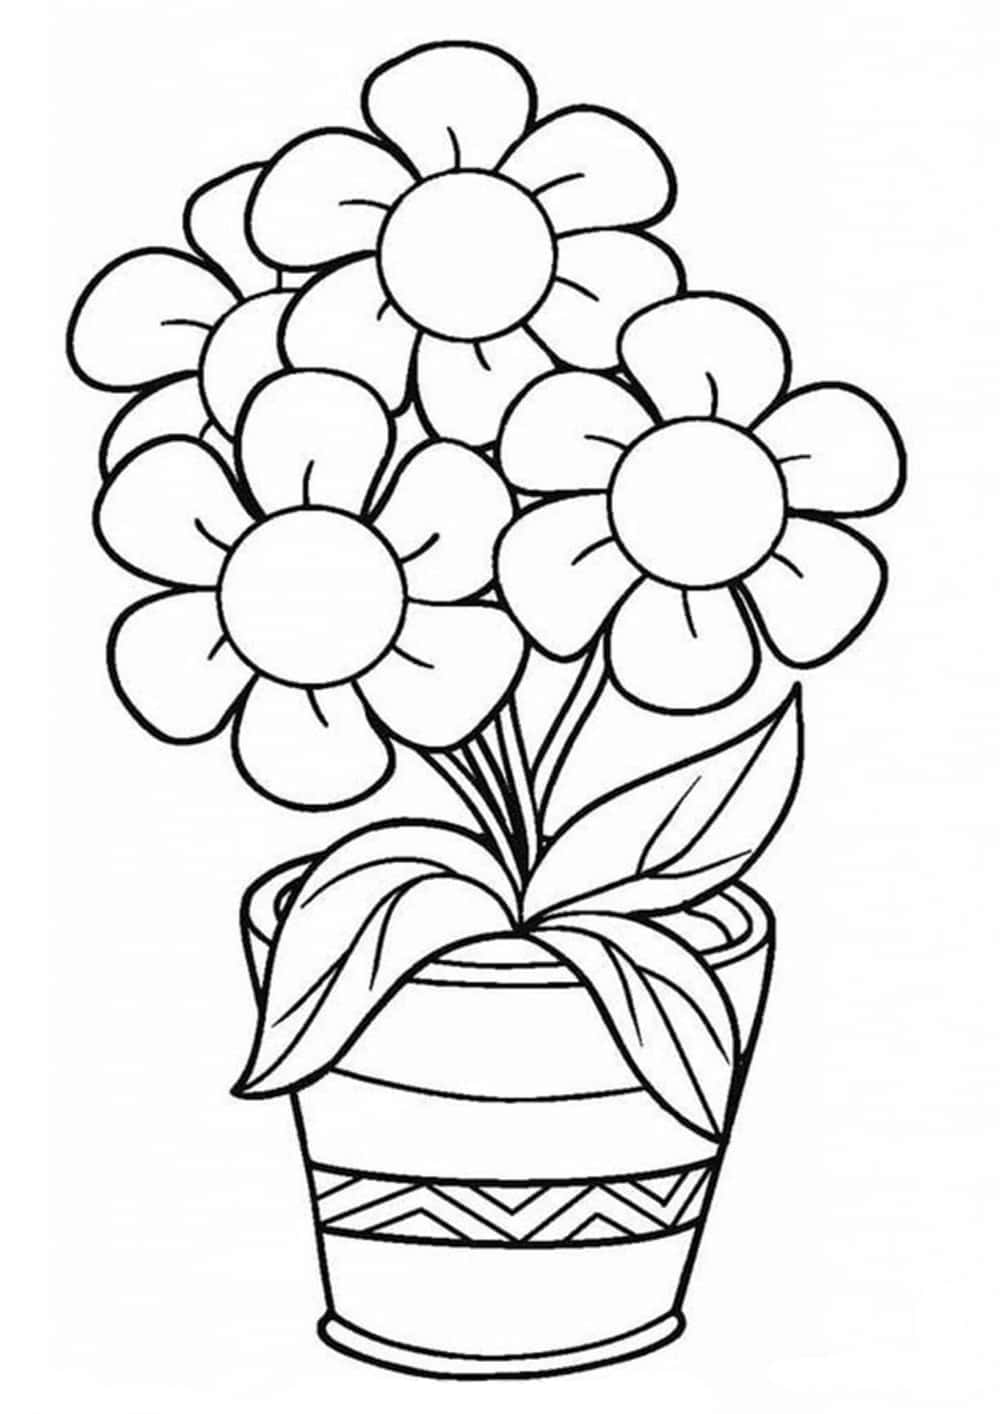 "Bring some color to your day with these beautiful flower coloring pictures!"